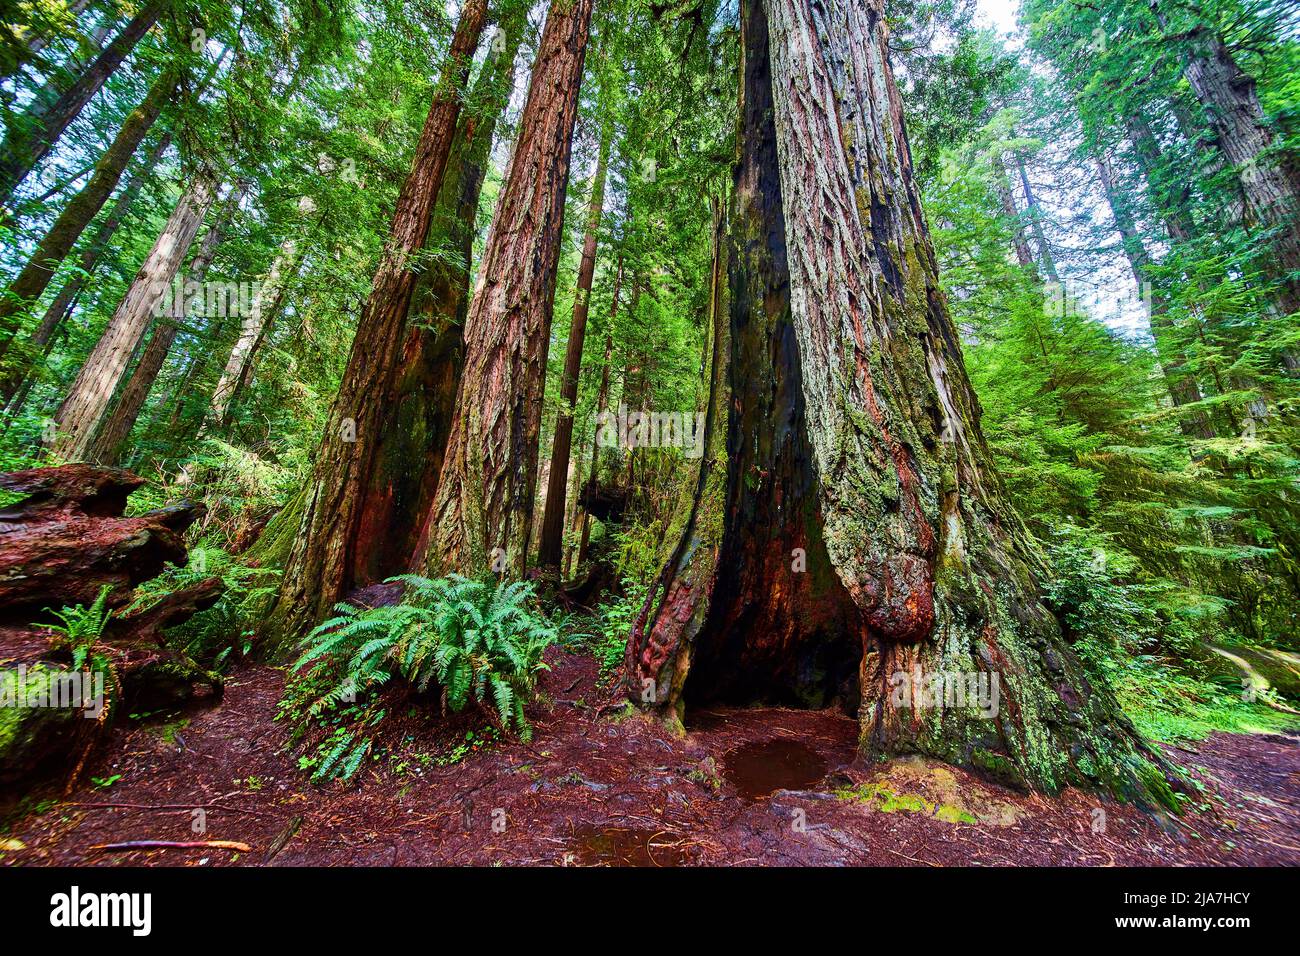 Hollowed out stunning ancient Redwood tree in California forest Stock Photo